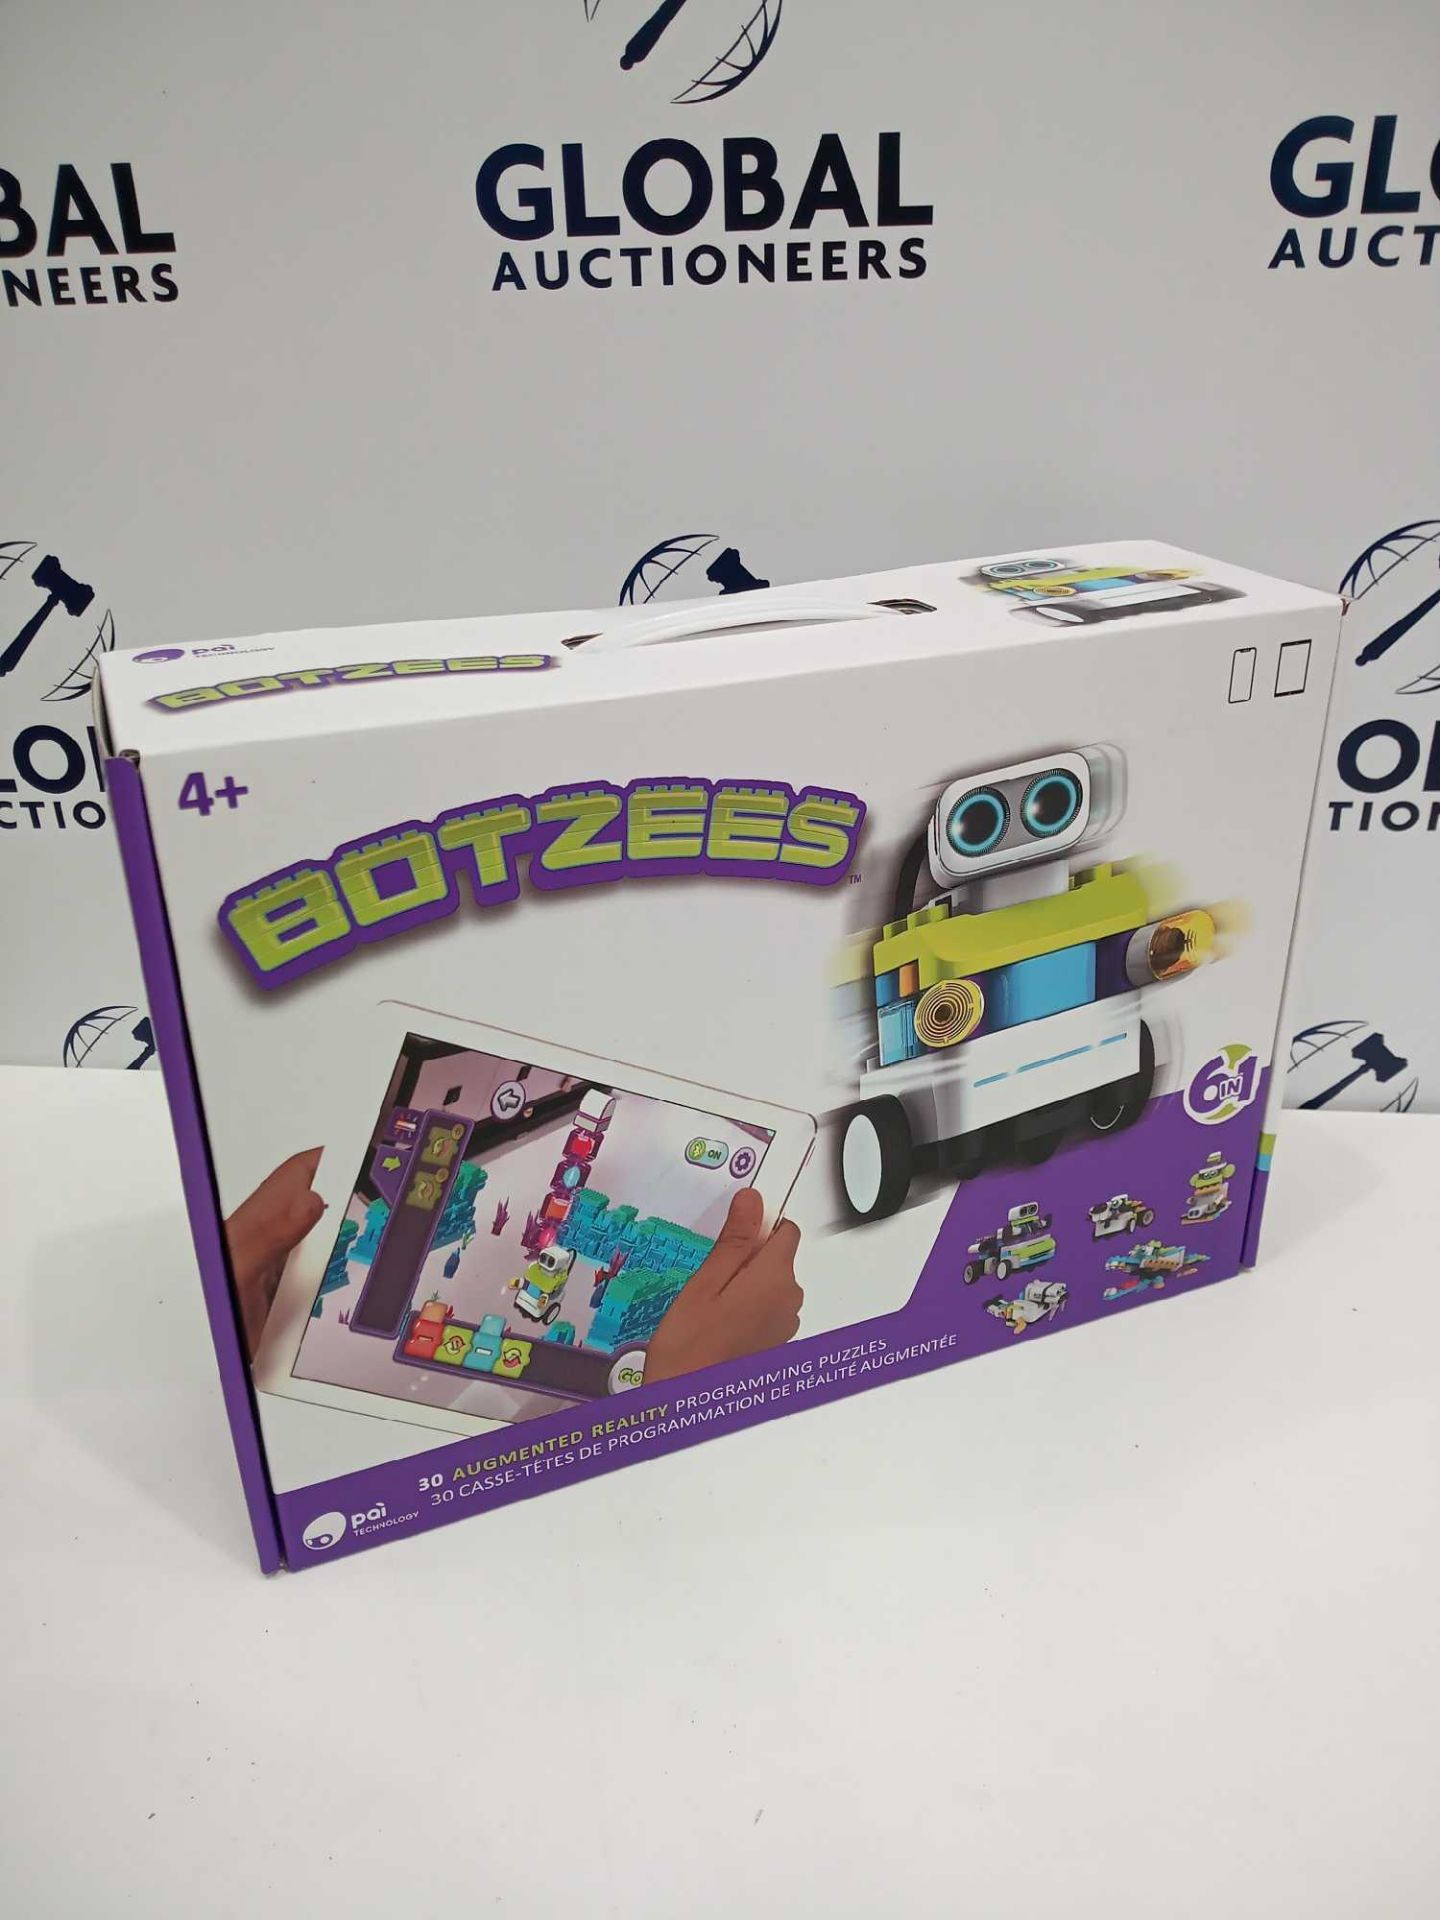 Rrp £120 Botzees Augmented Reality Programmable Robot With 30Th Programming Puzzles - Image 2 of 2